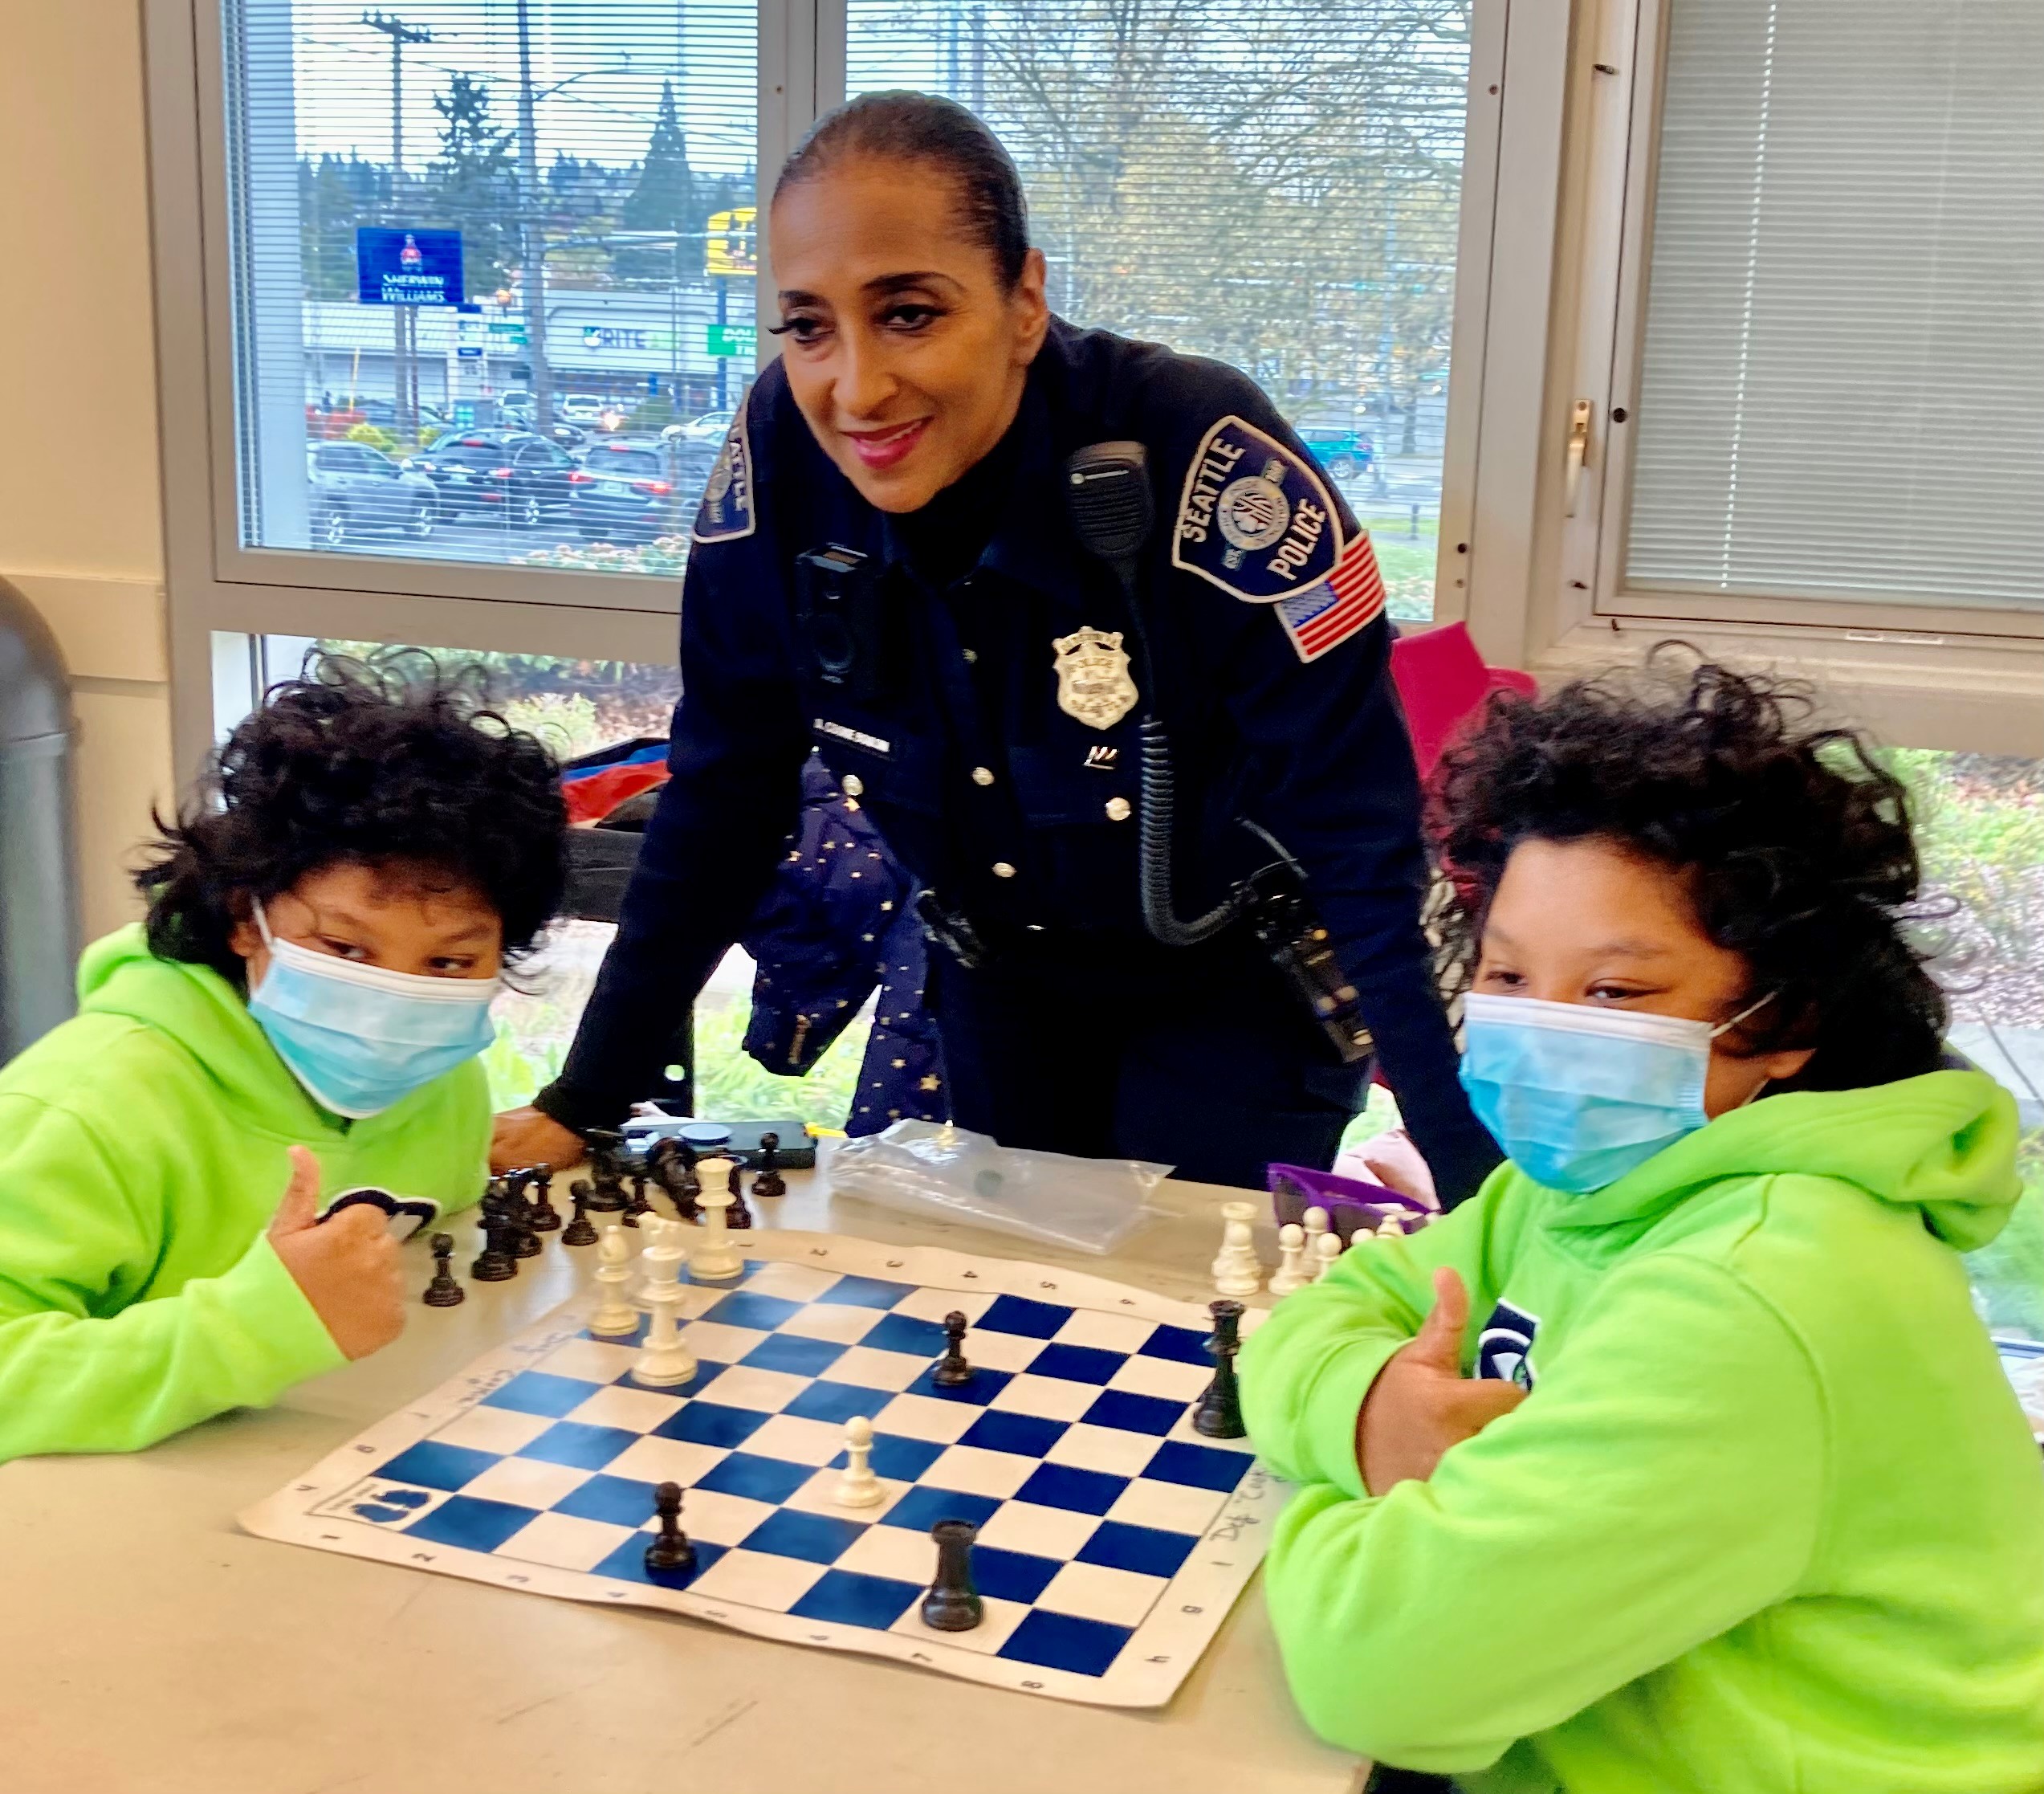 A Black woman wearing her police uniform stands at a table between two young children playing chess.